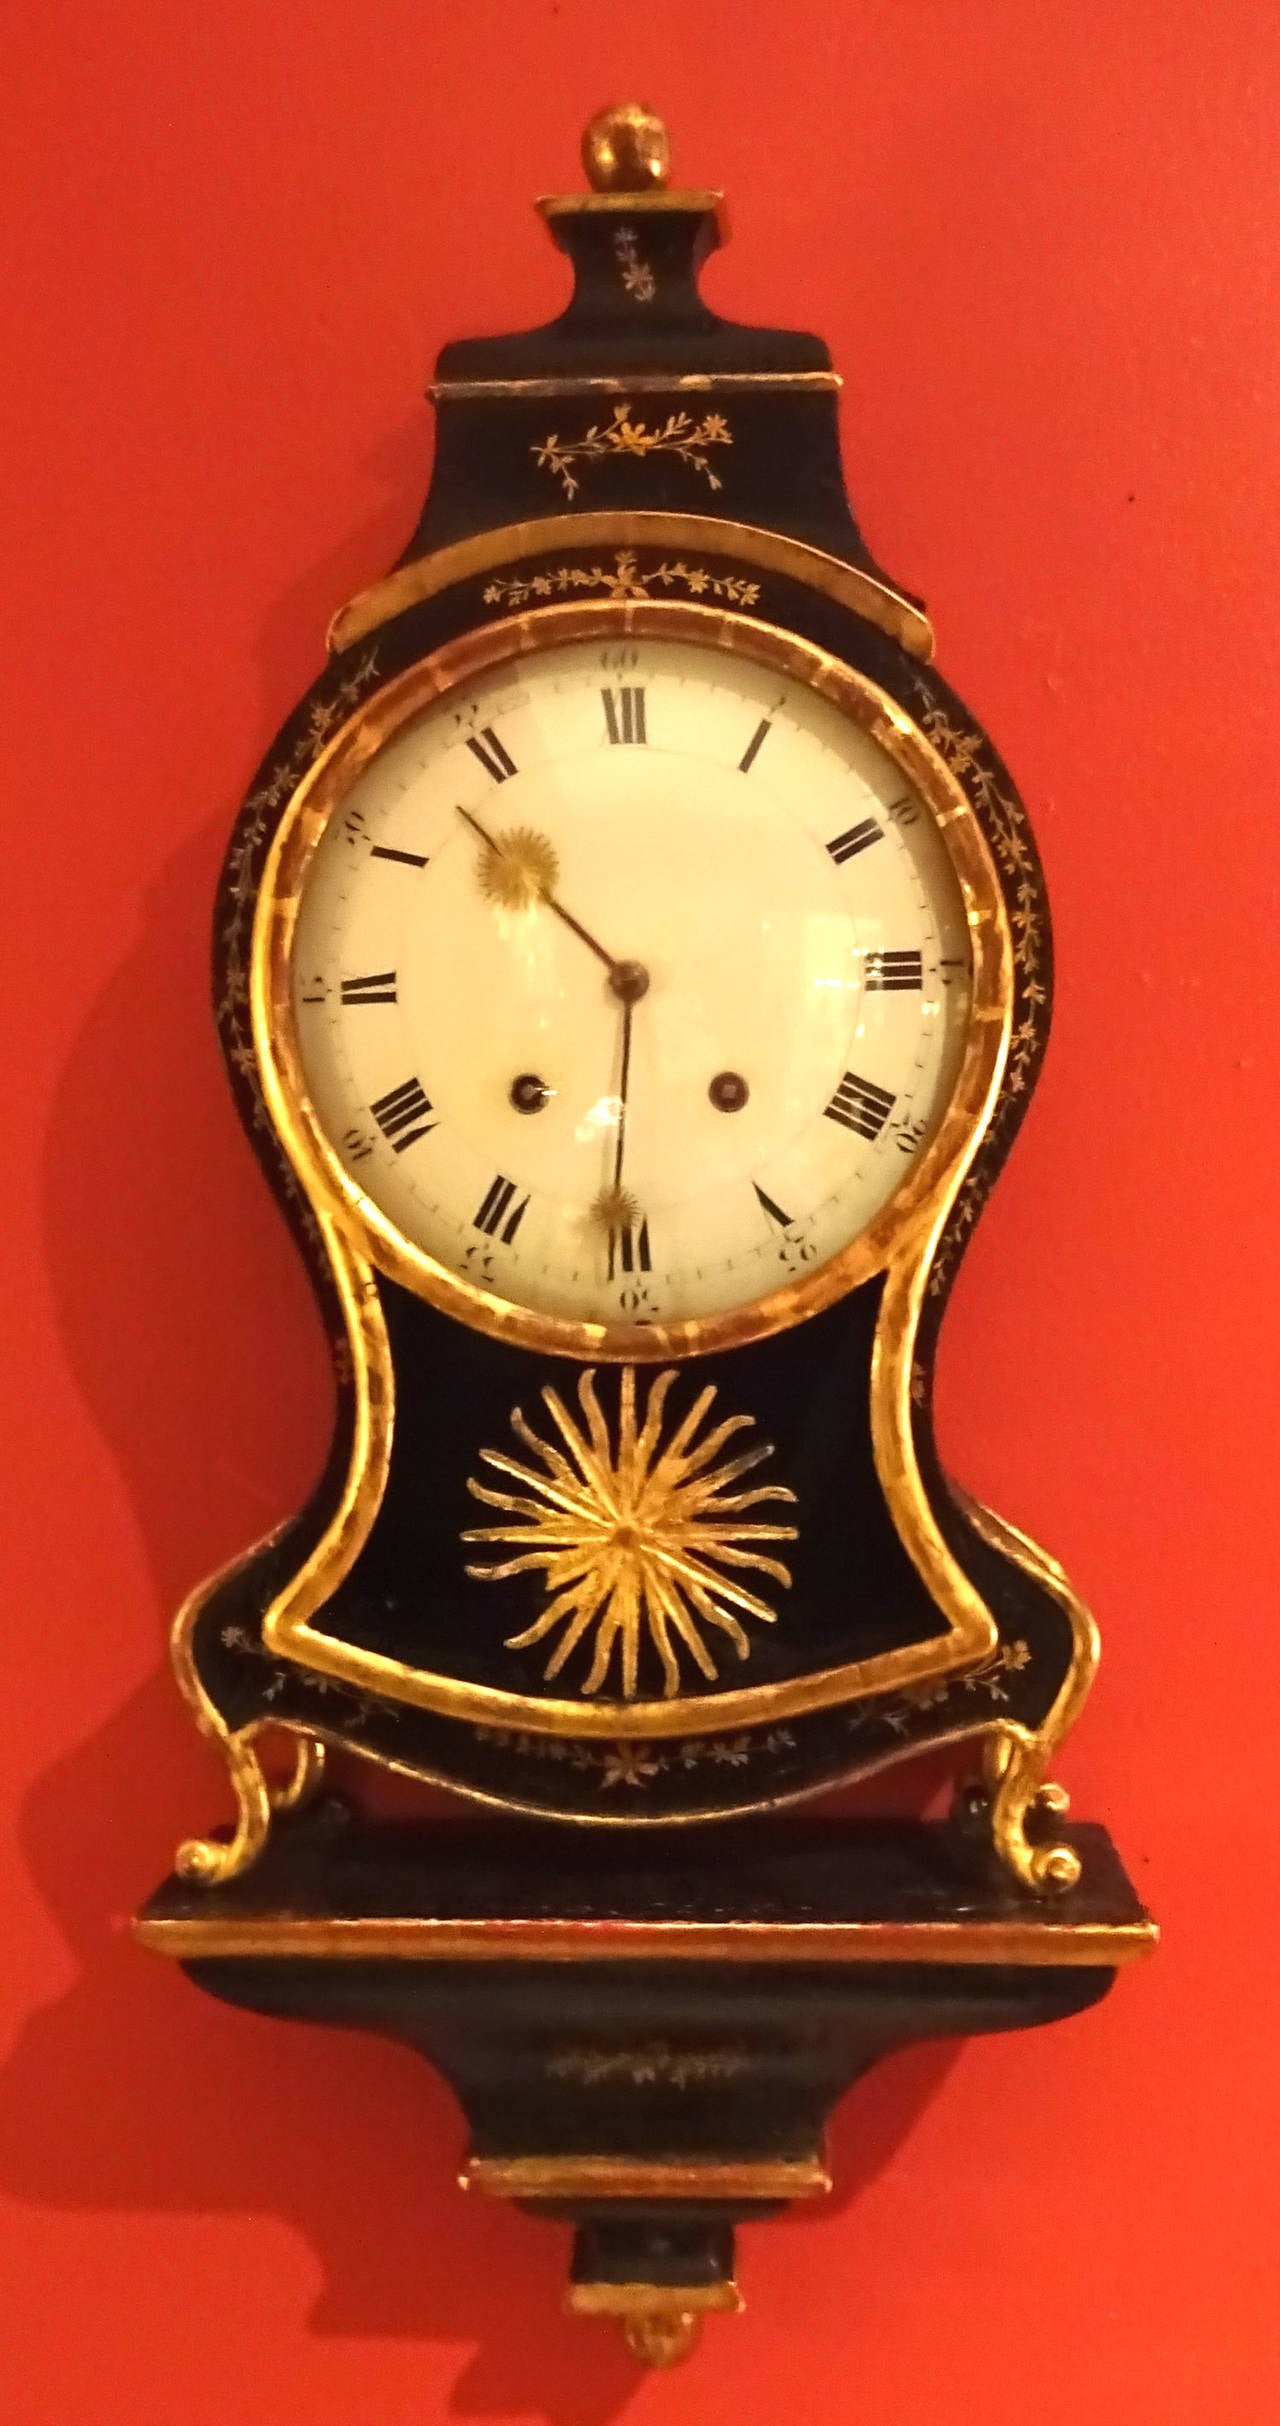 Louis XV style decorative bracket clock in ebony and gilt. The sunburst design on the hands is repeated in a central gilt sunburst located below the face (possibly a later addition). One of the rays of the starburst is missing and could possibly be